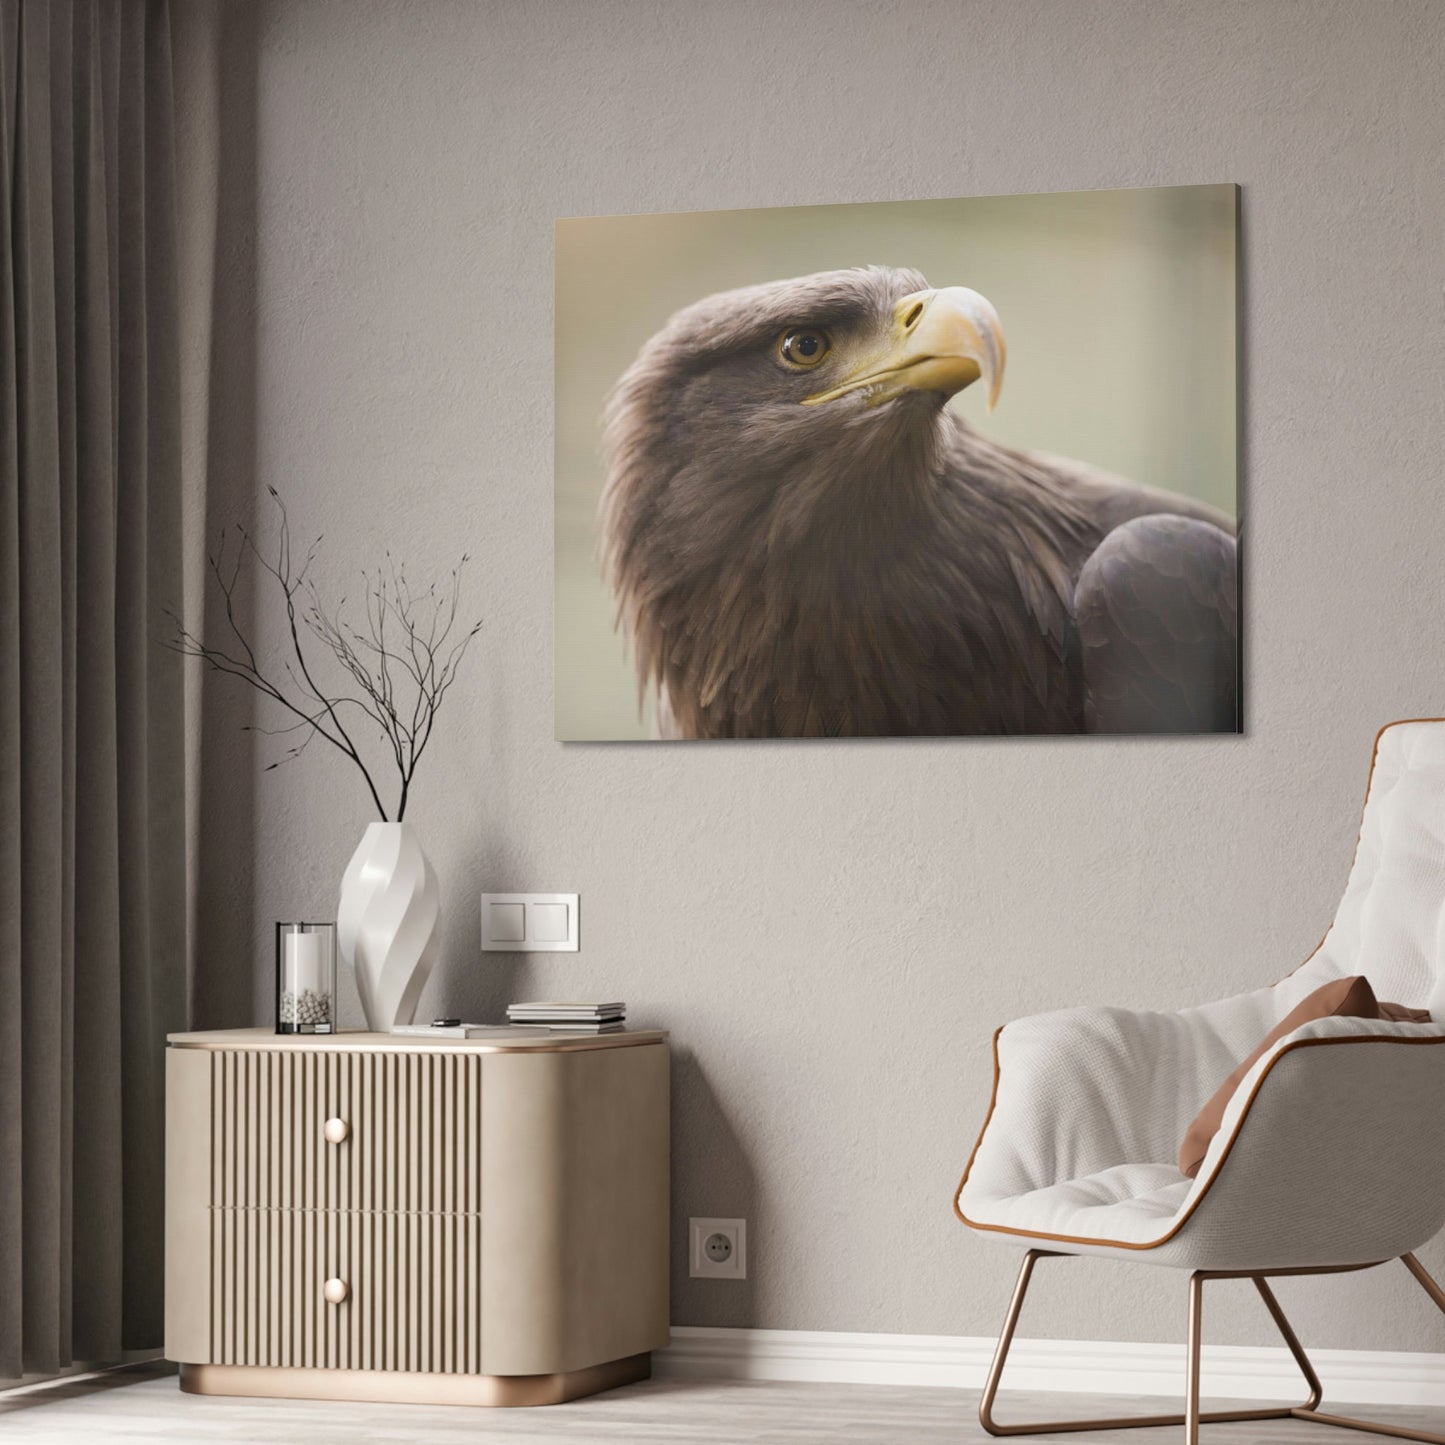 Flight of Wonder: Wall Art Enthralling with the Mystique of Eagles in Flight